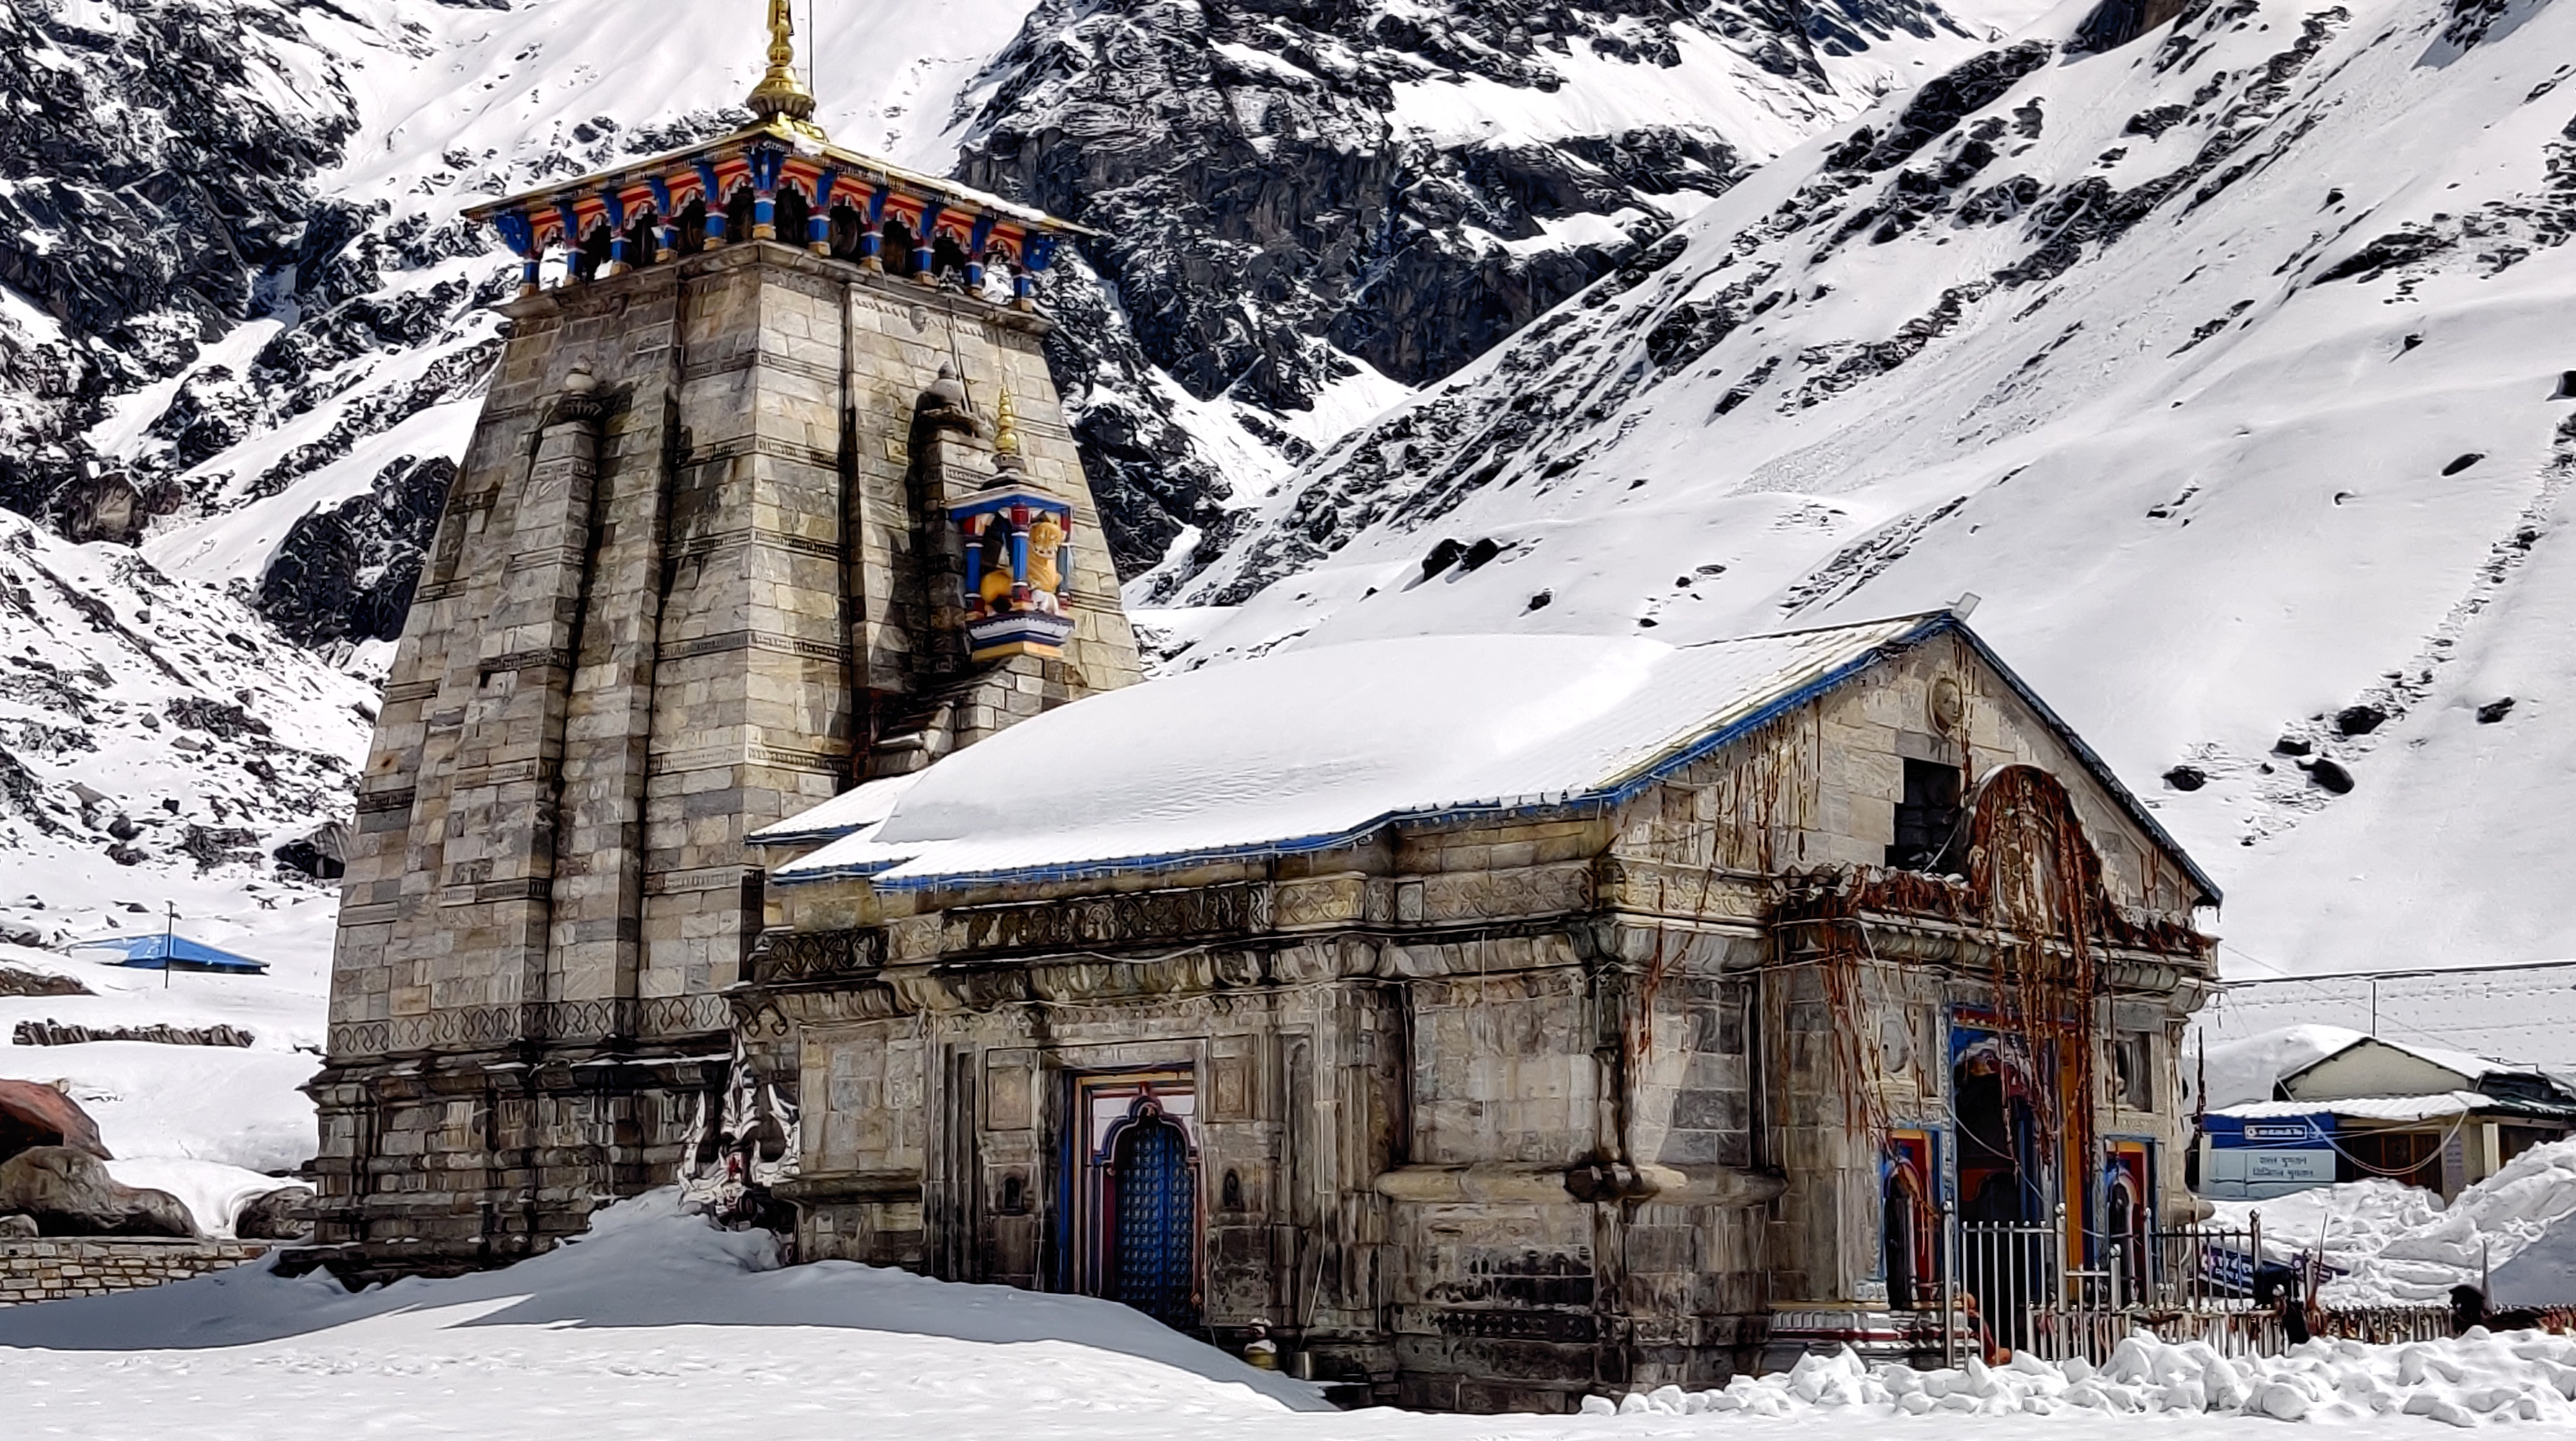 Gold-plating Kedarnath temple walls receives flak from priests. The Theorist